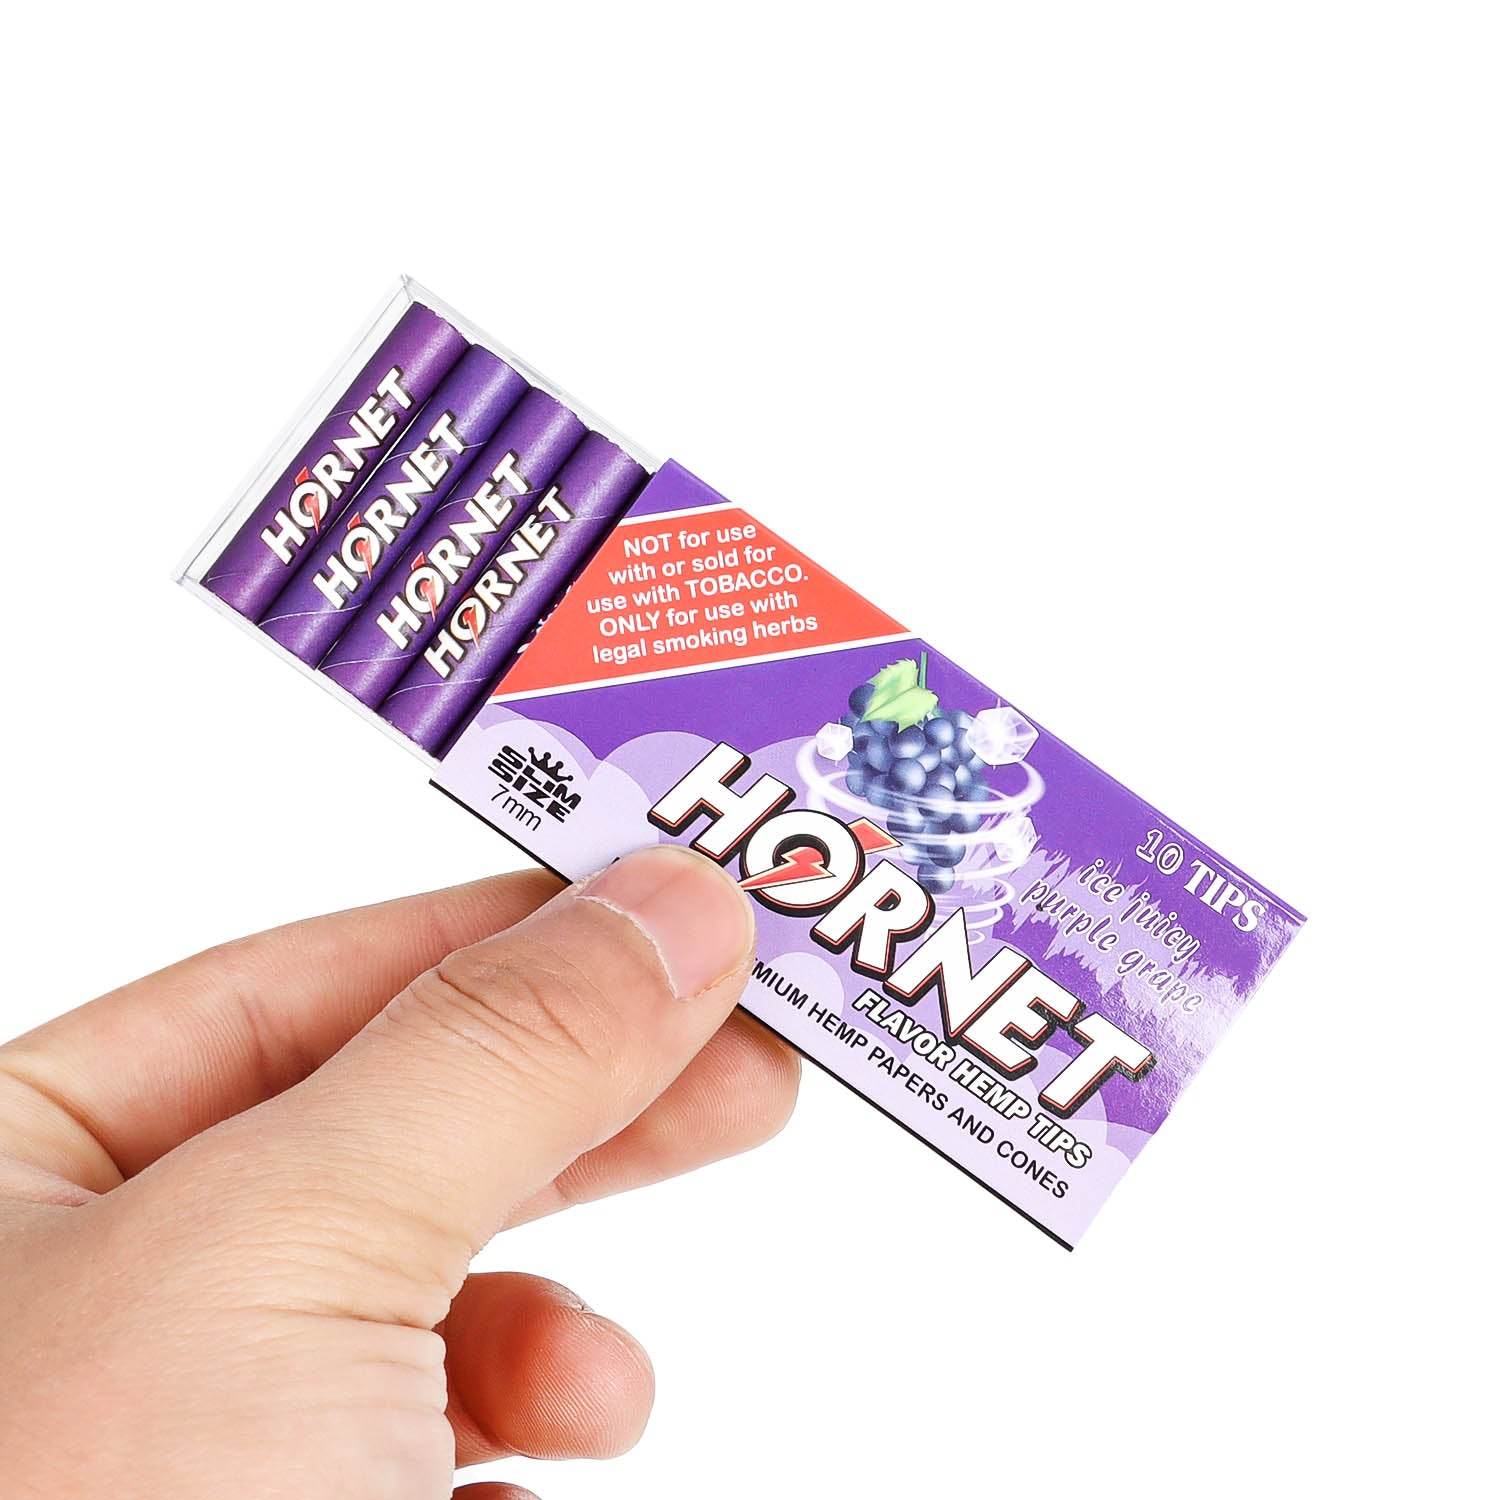 HORNET Grape Flavors Filter Tips with Flavored Pop, 7 mm Filter Tips, 10 Tips / Pack 24 Packs / Box